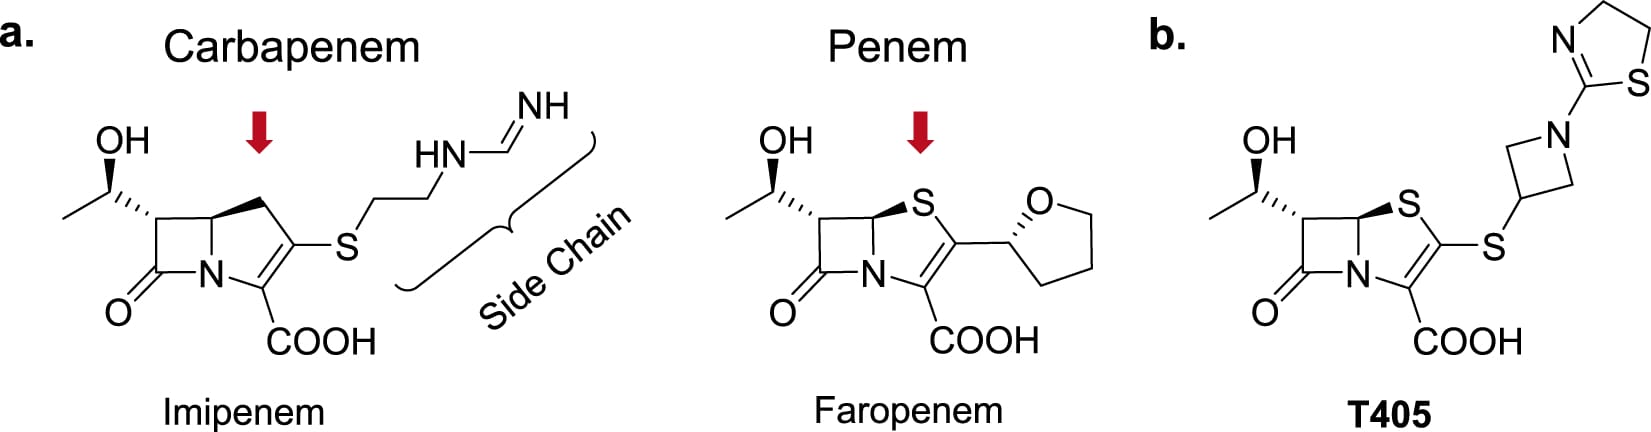 Structures of the carbapenem Imipenem and the penem Faropenem are shown with red arrows indicating the differences in the ring structures. b Structure of the new penem developed here, T405.